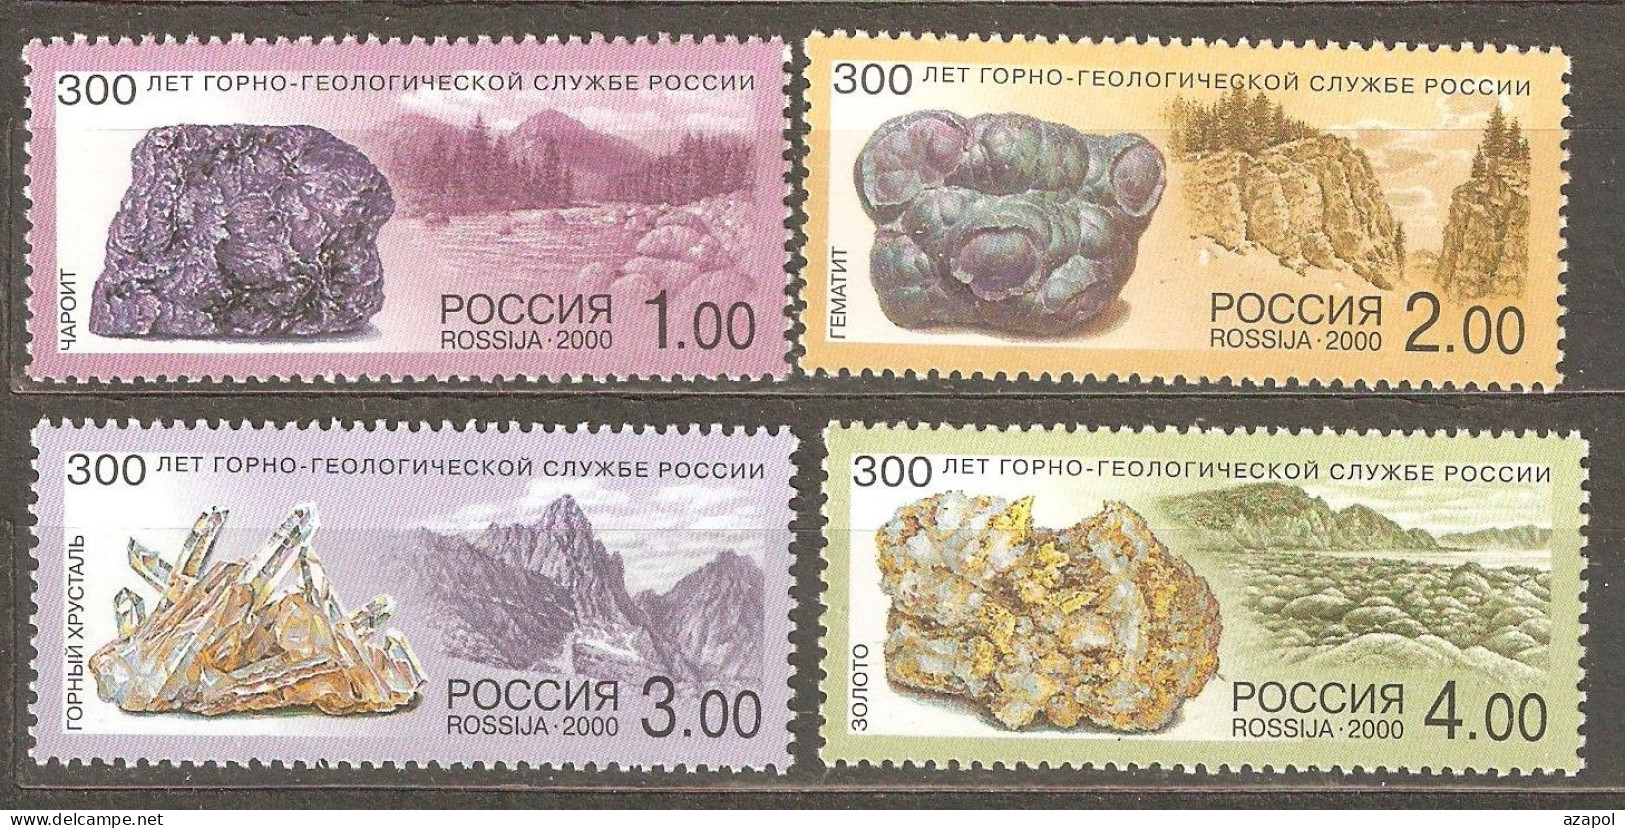 Russia: Full Set Of 4 Mint Stamps, 300 Years Of Rock-Geological Service, 2000, Mi#845-848, MNH - Minerali